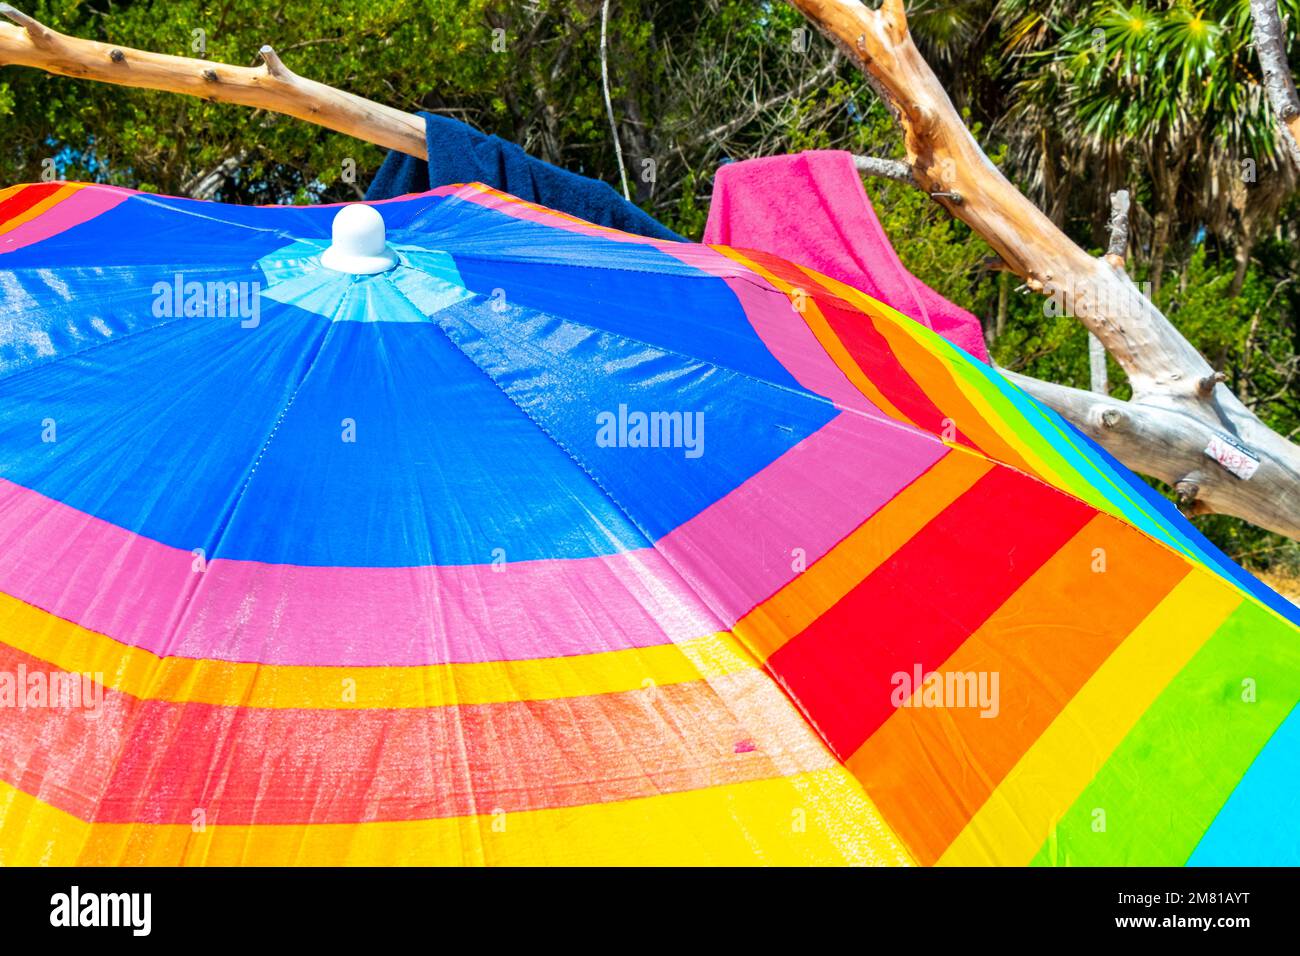 husmor Fortæl mig resultat Colorful parasol with many colors on the beach in Playa del Carmen Quintana  Roo Mexico Stock Photo - Alamy